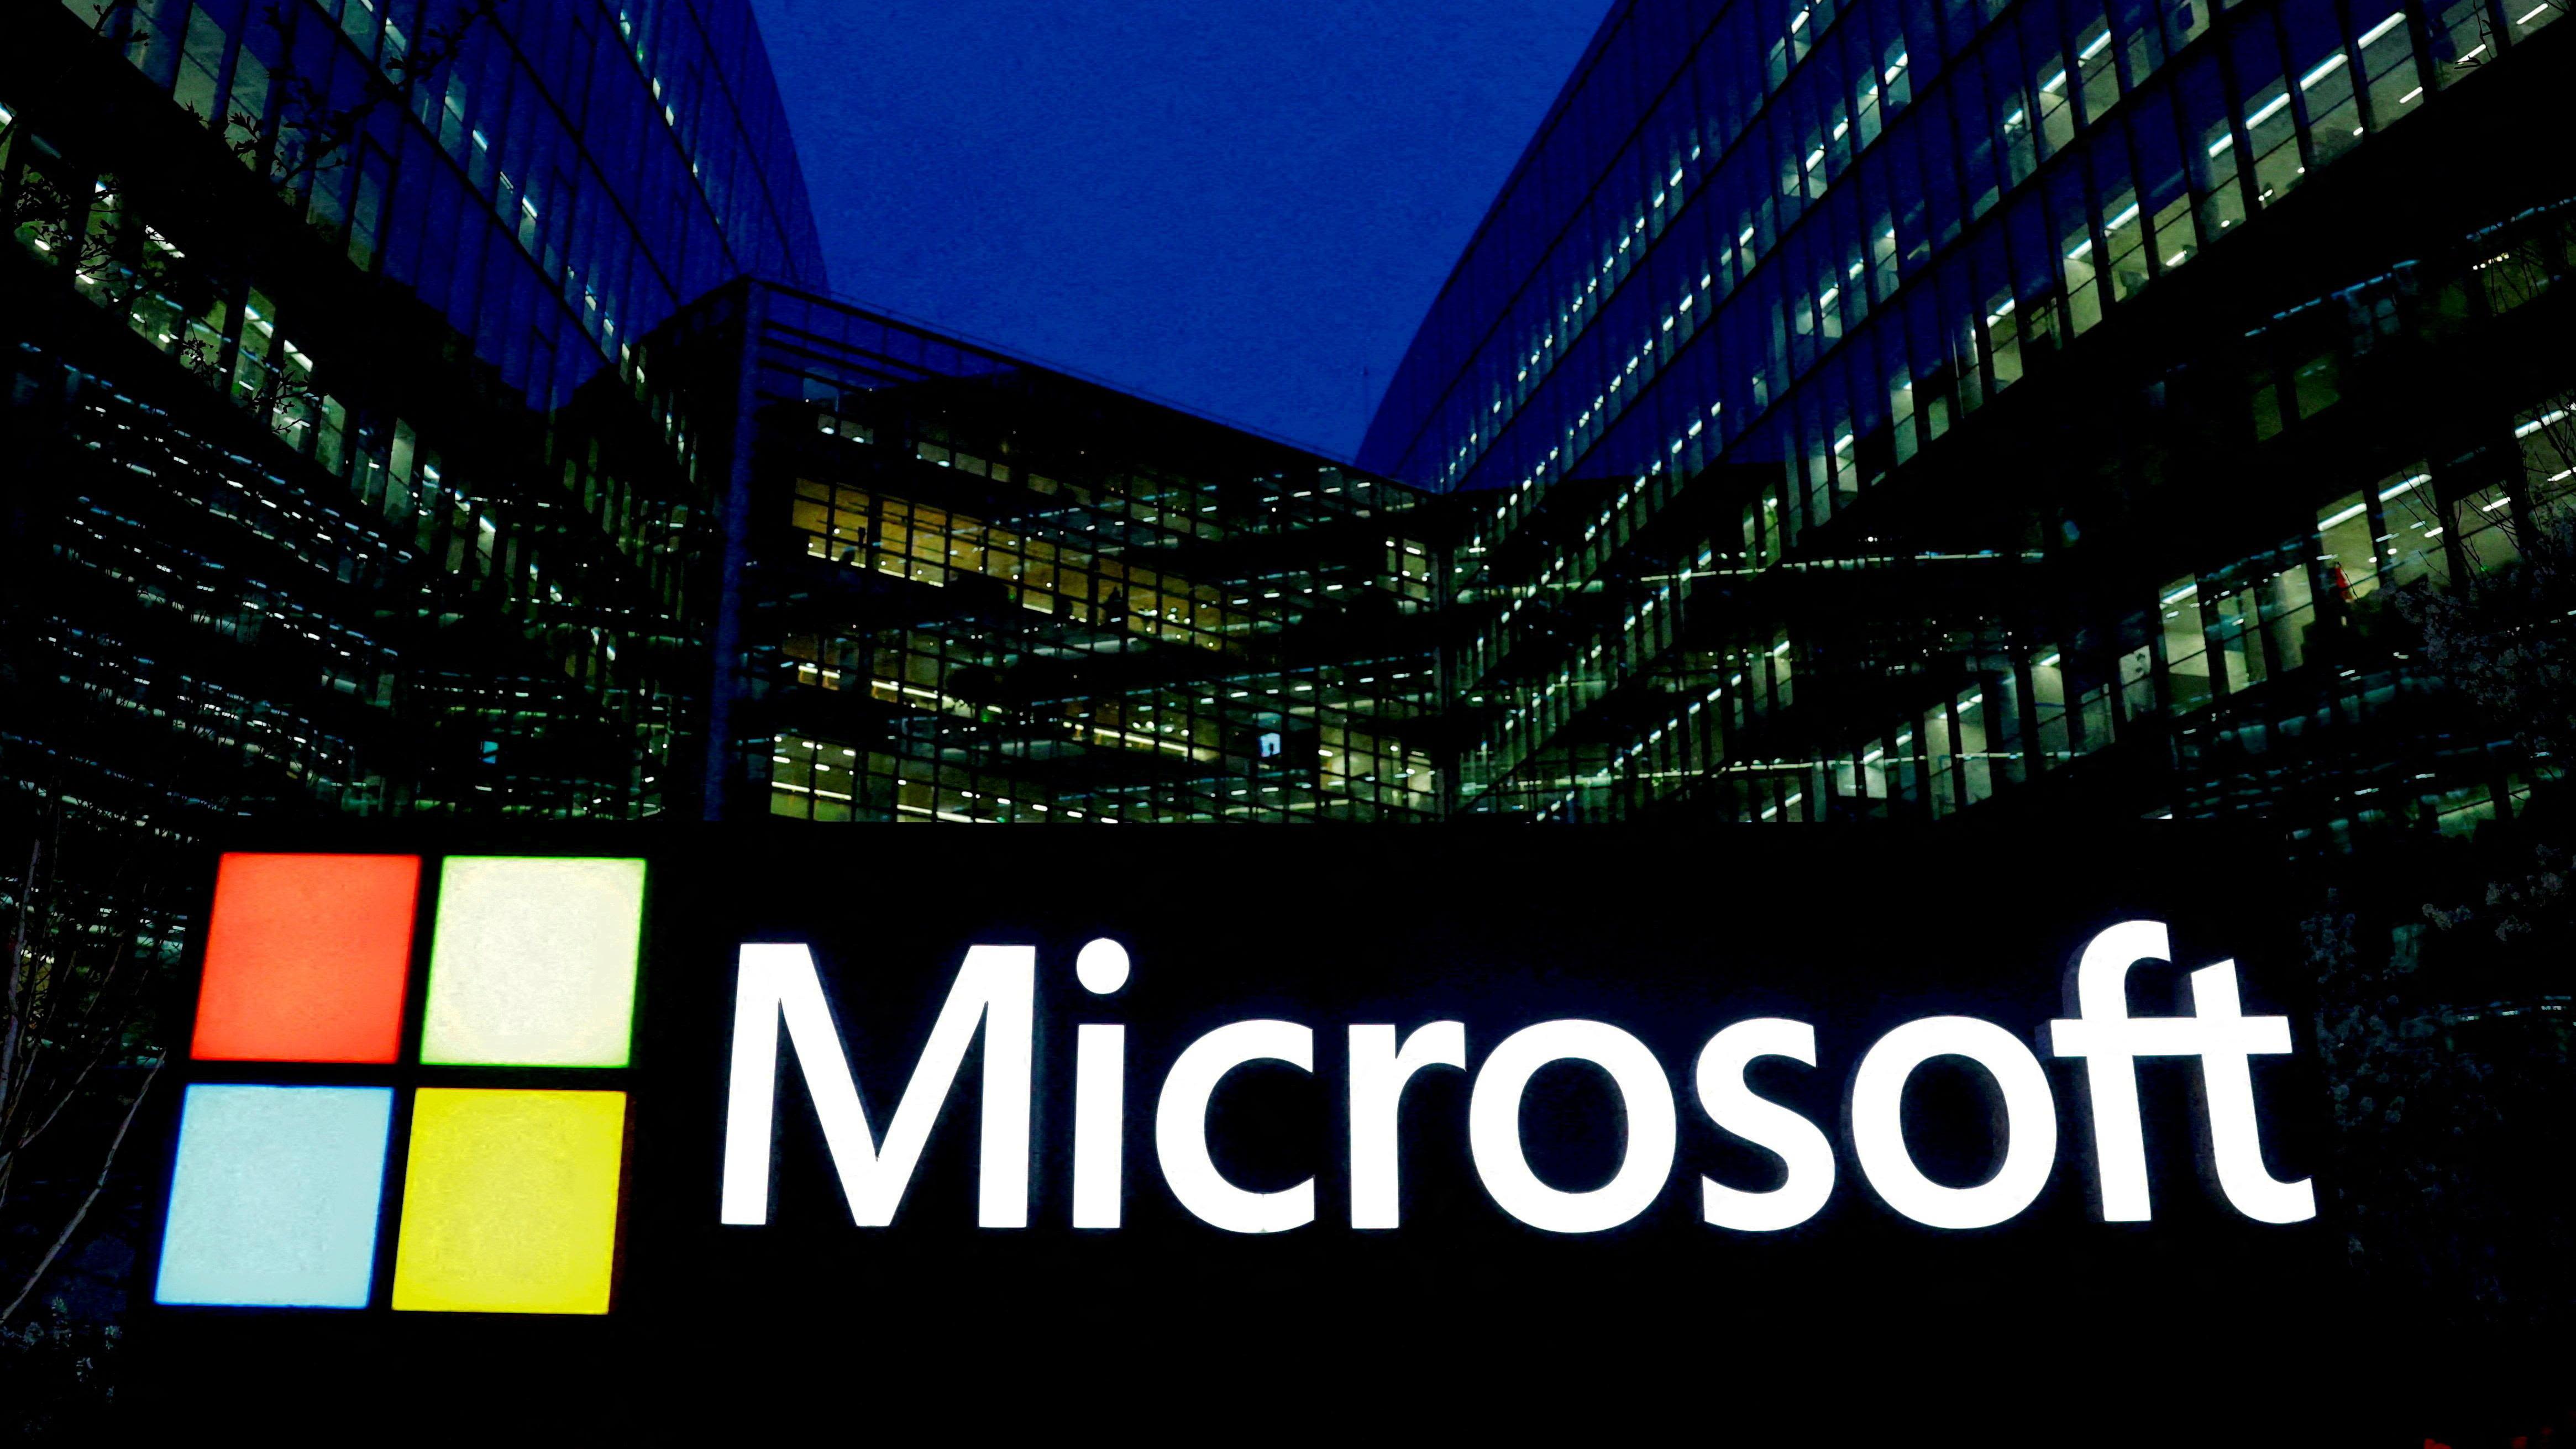 Microsoft says cyber-attack triggered latest outage